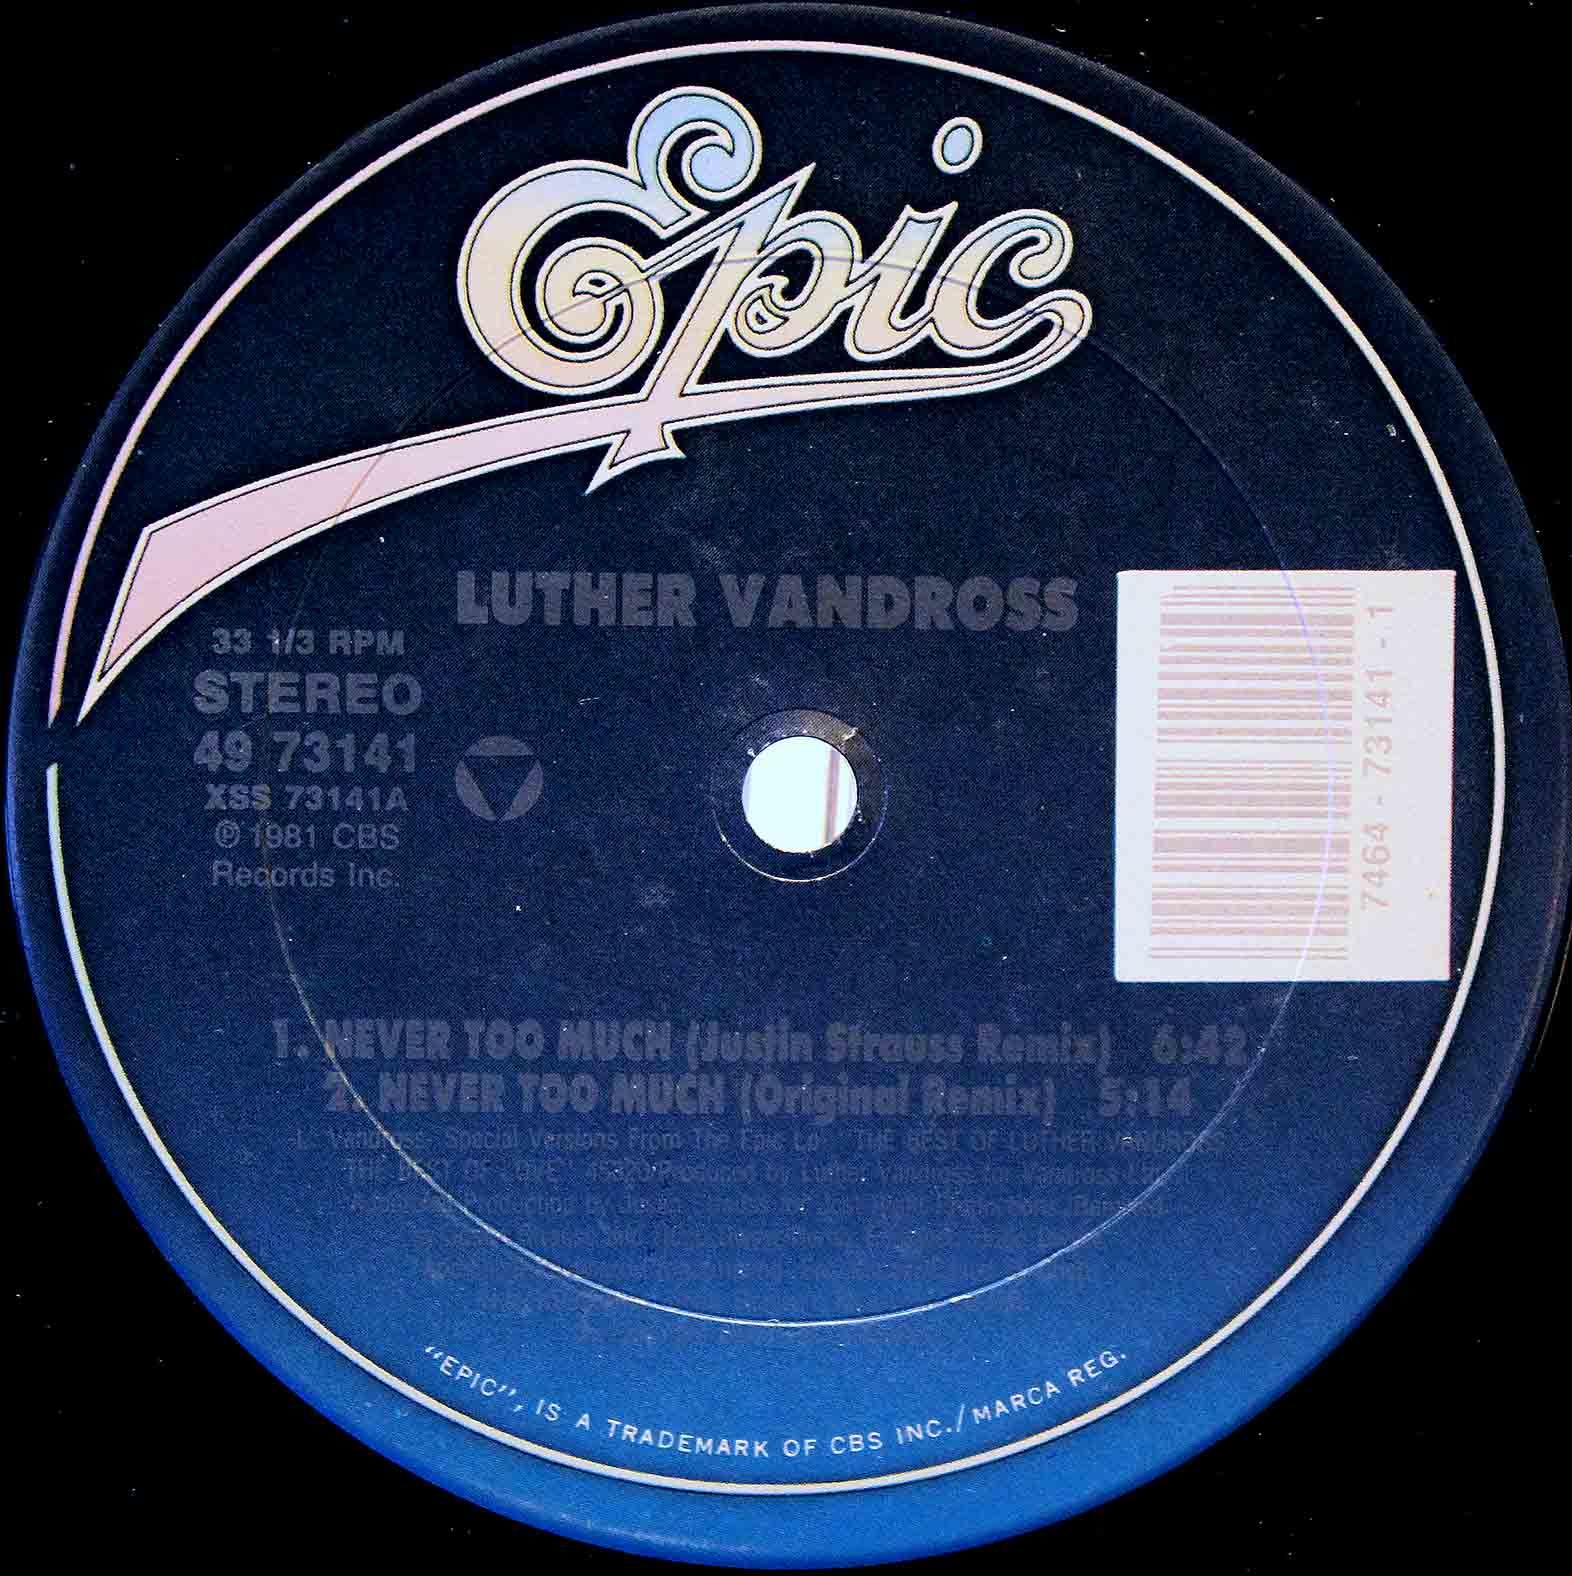 Luther Vandross Never too much 03